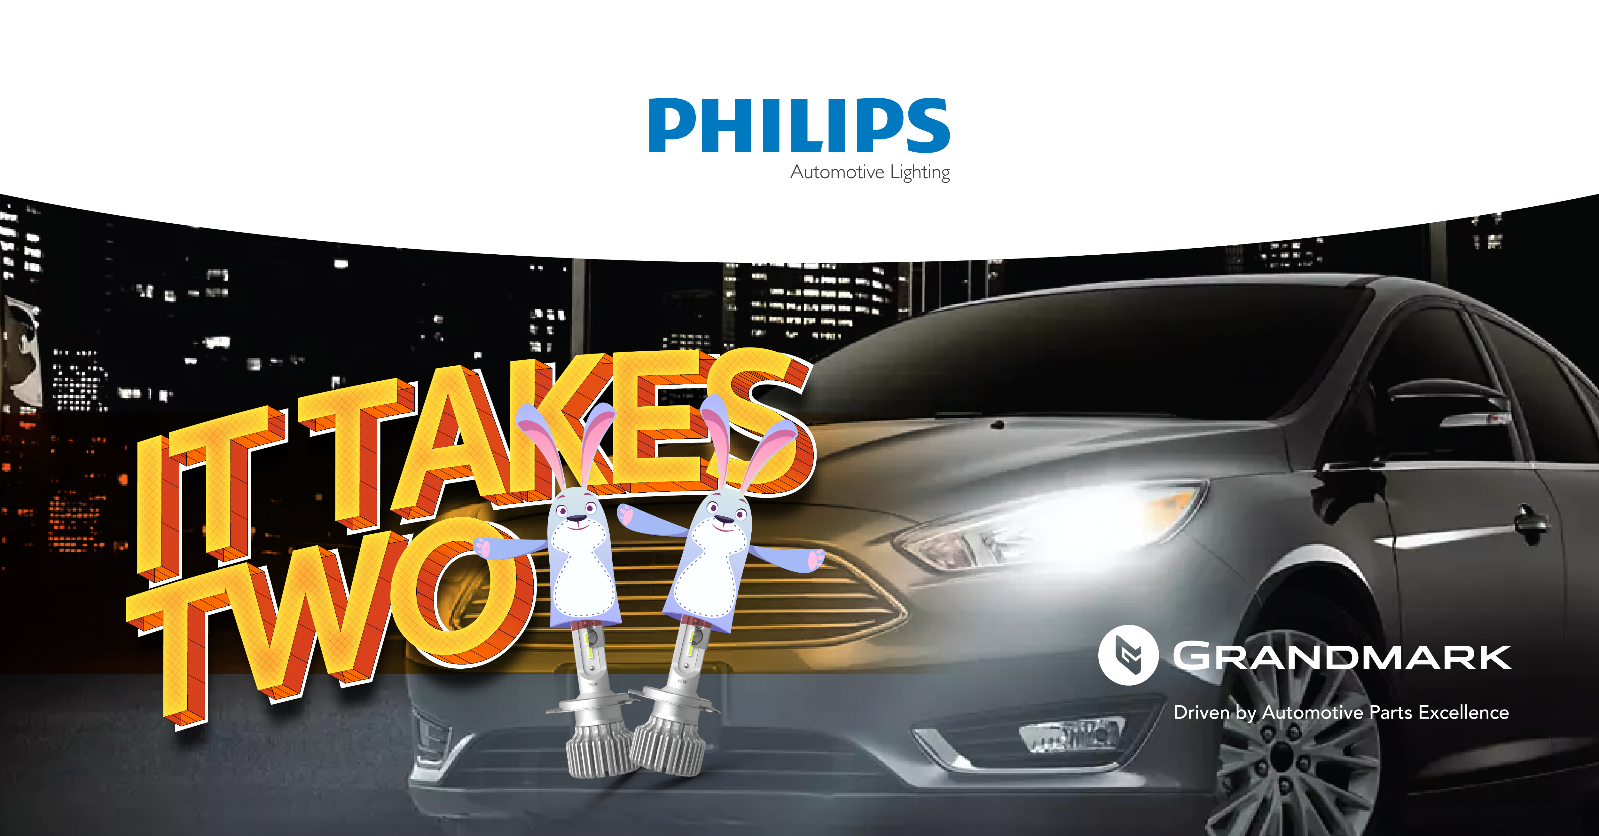 Be confident on the roads this Easter. Change your headlights in Two’s!